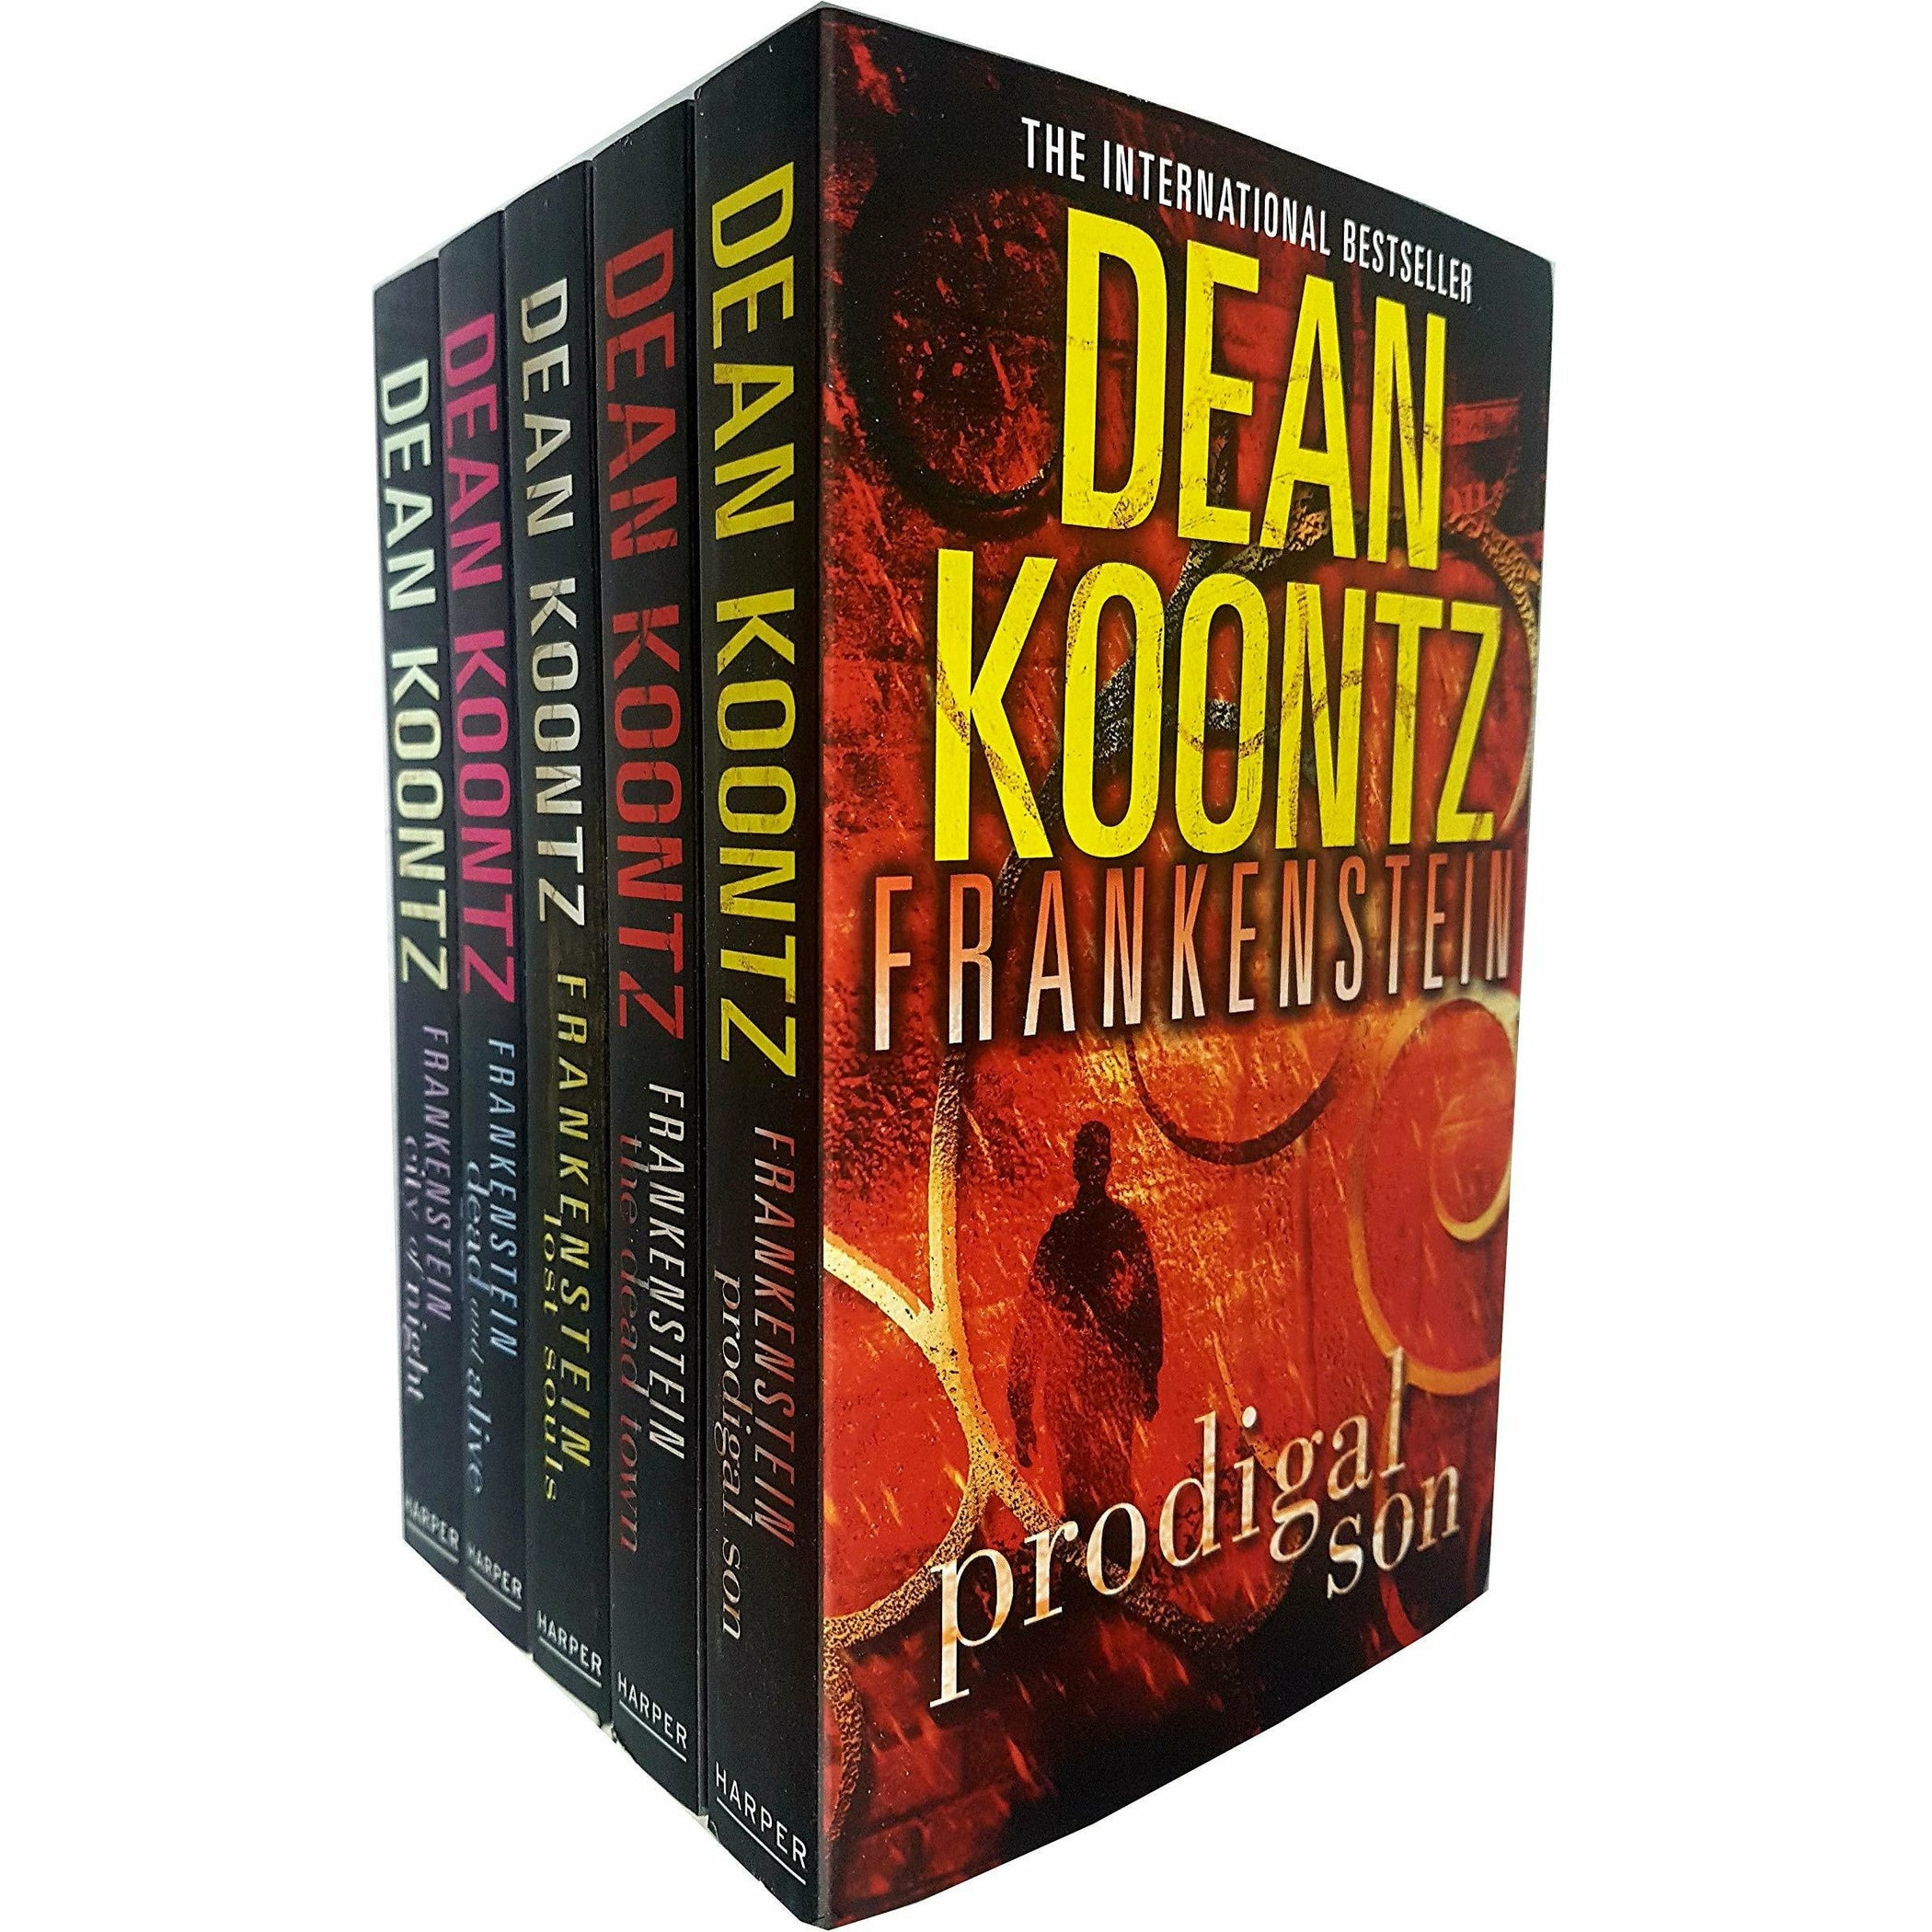 dean koontz the lost soul of the city